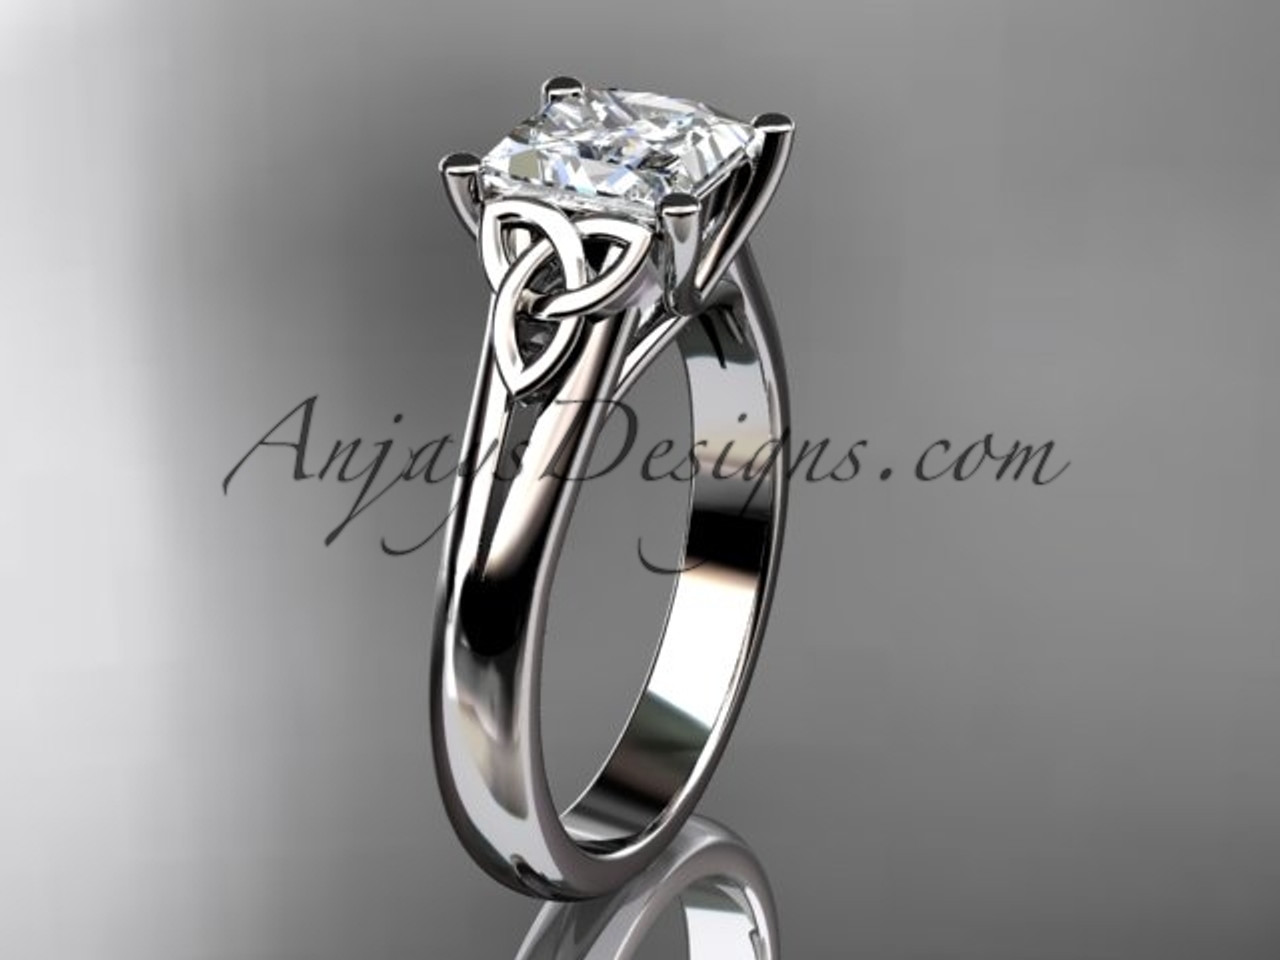 1 CT. T.W. Princess-Cut Diamond Double Frame Engagement Ring in 14K White  Gold | Zales